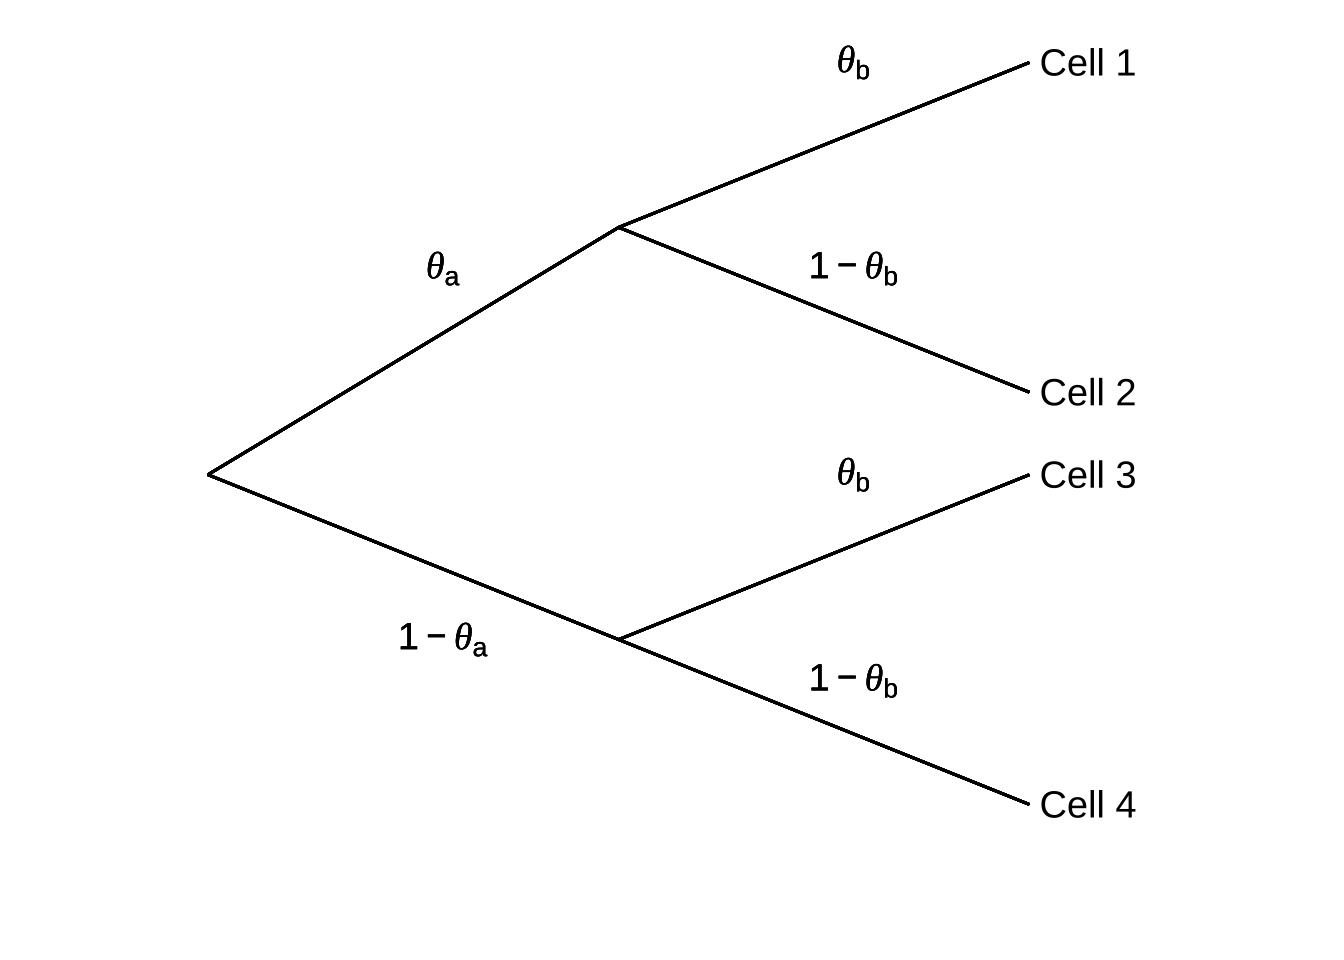 Generic Tree Representation of a Multinomial Model (adapted from Batchelder & Reifer, 1999)